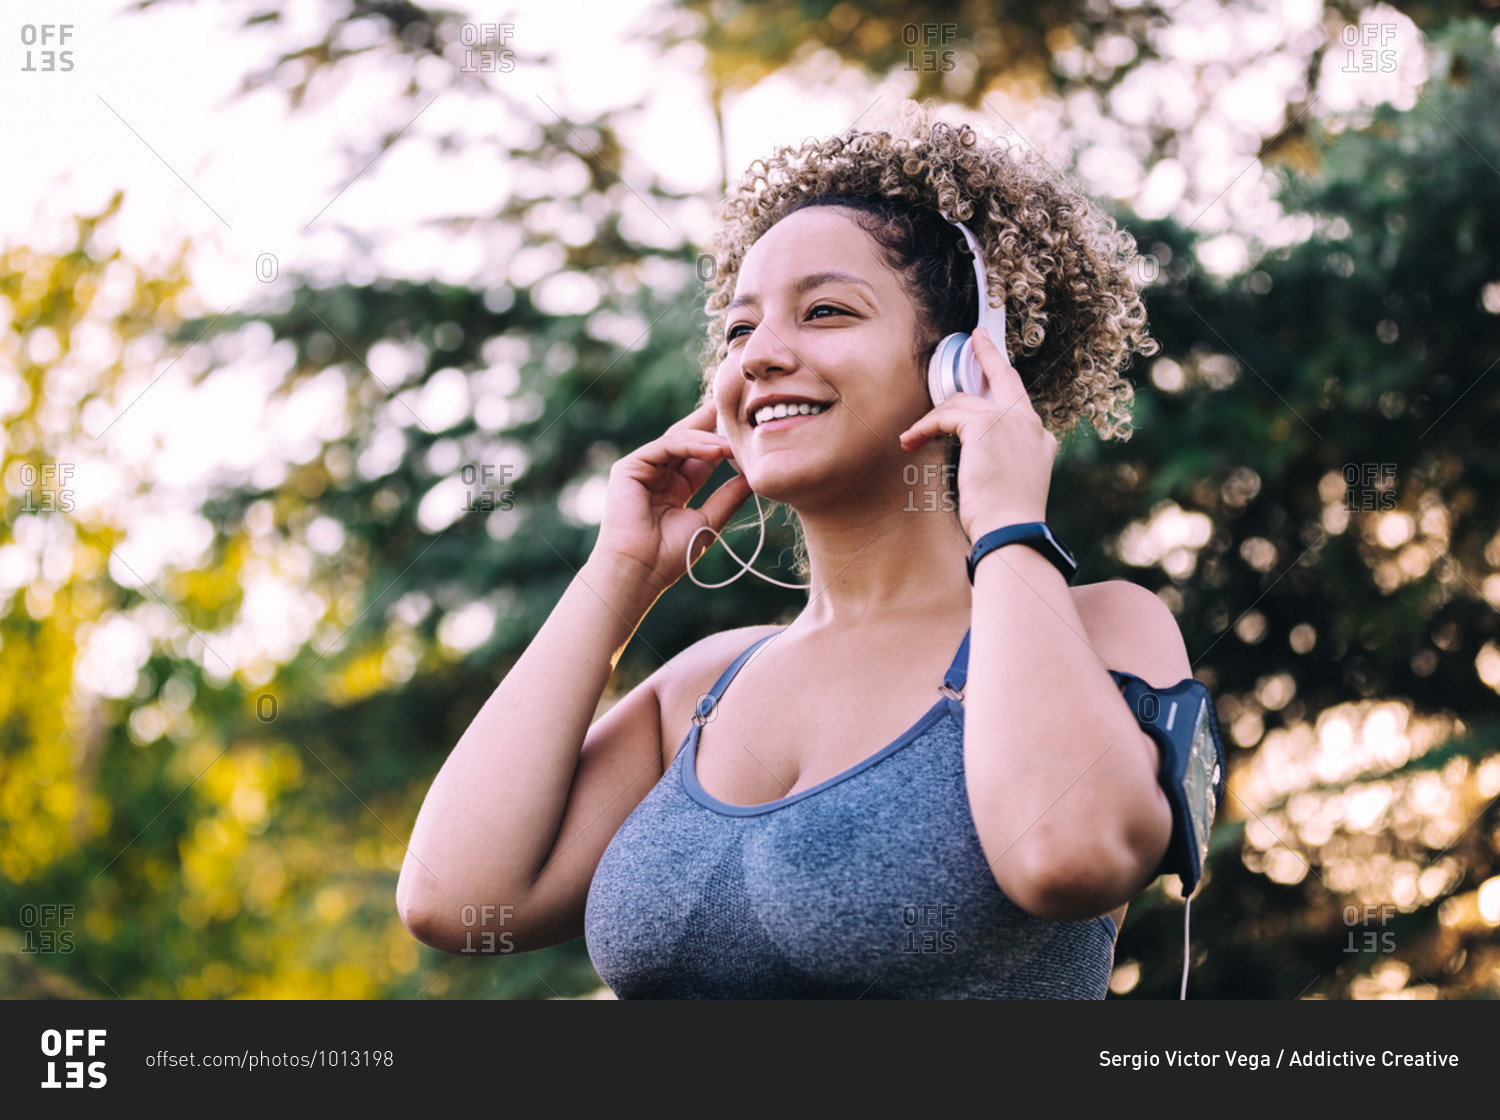 Low angle of optimistic young ethnic female with Afro hairstyle adjusting headphones while listening to music on smartphone during training in green park